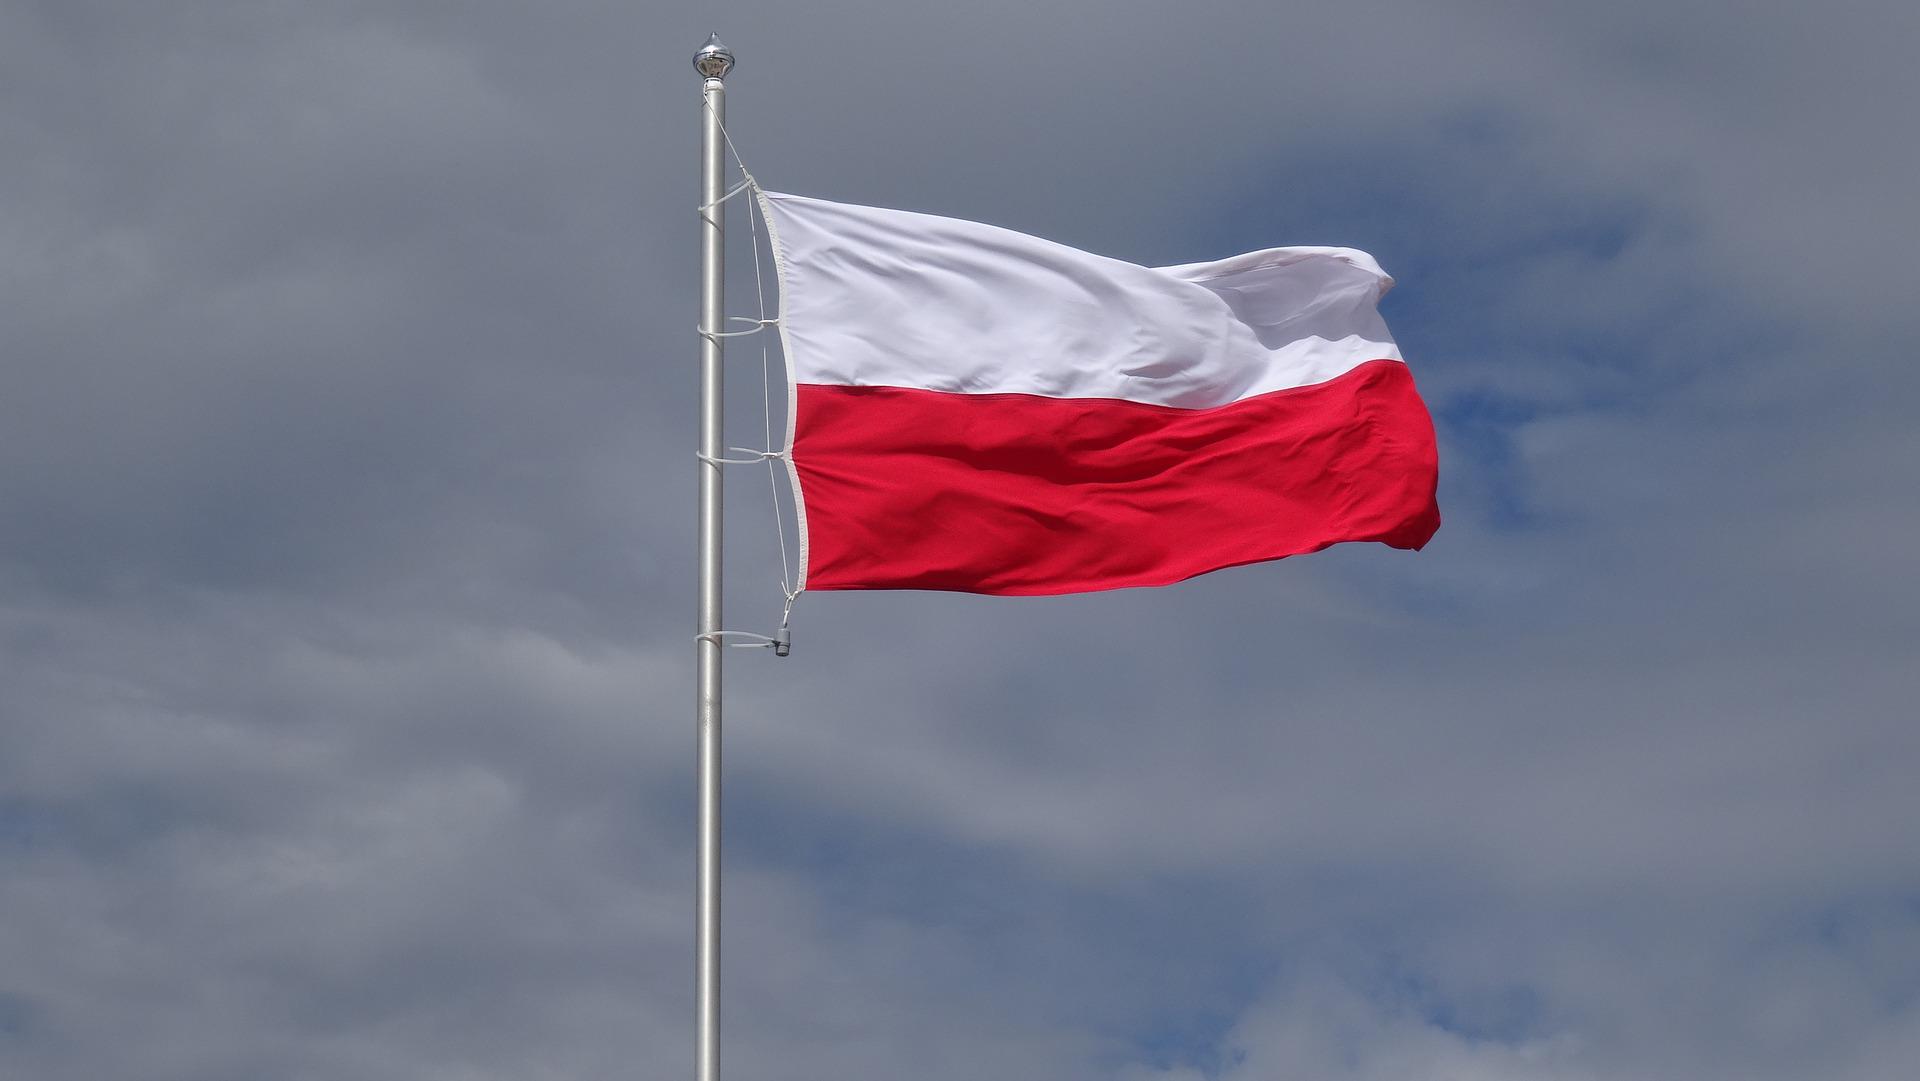 Polish Premier states instant target to be combating Russia instead of climate changes